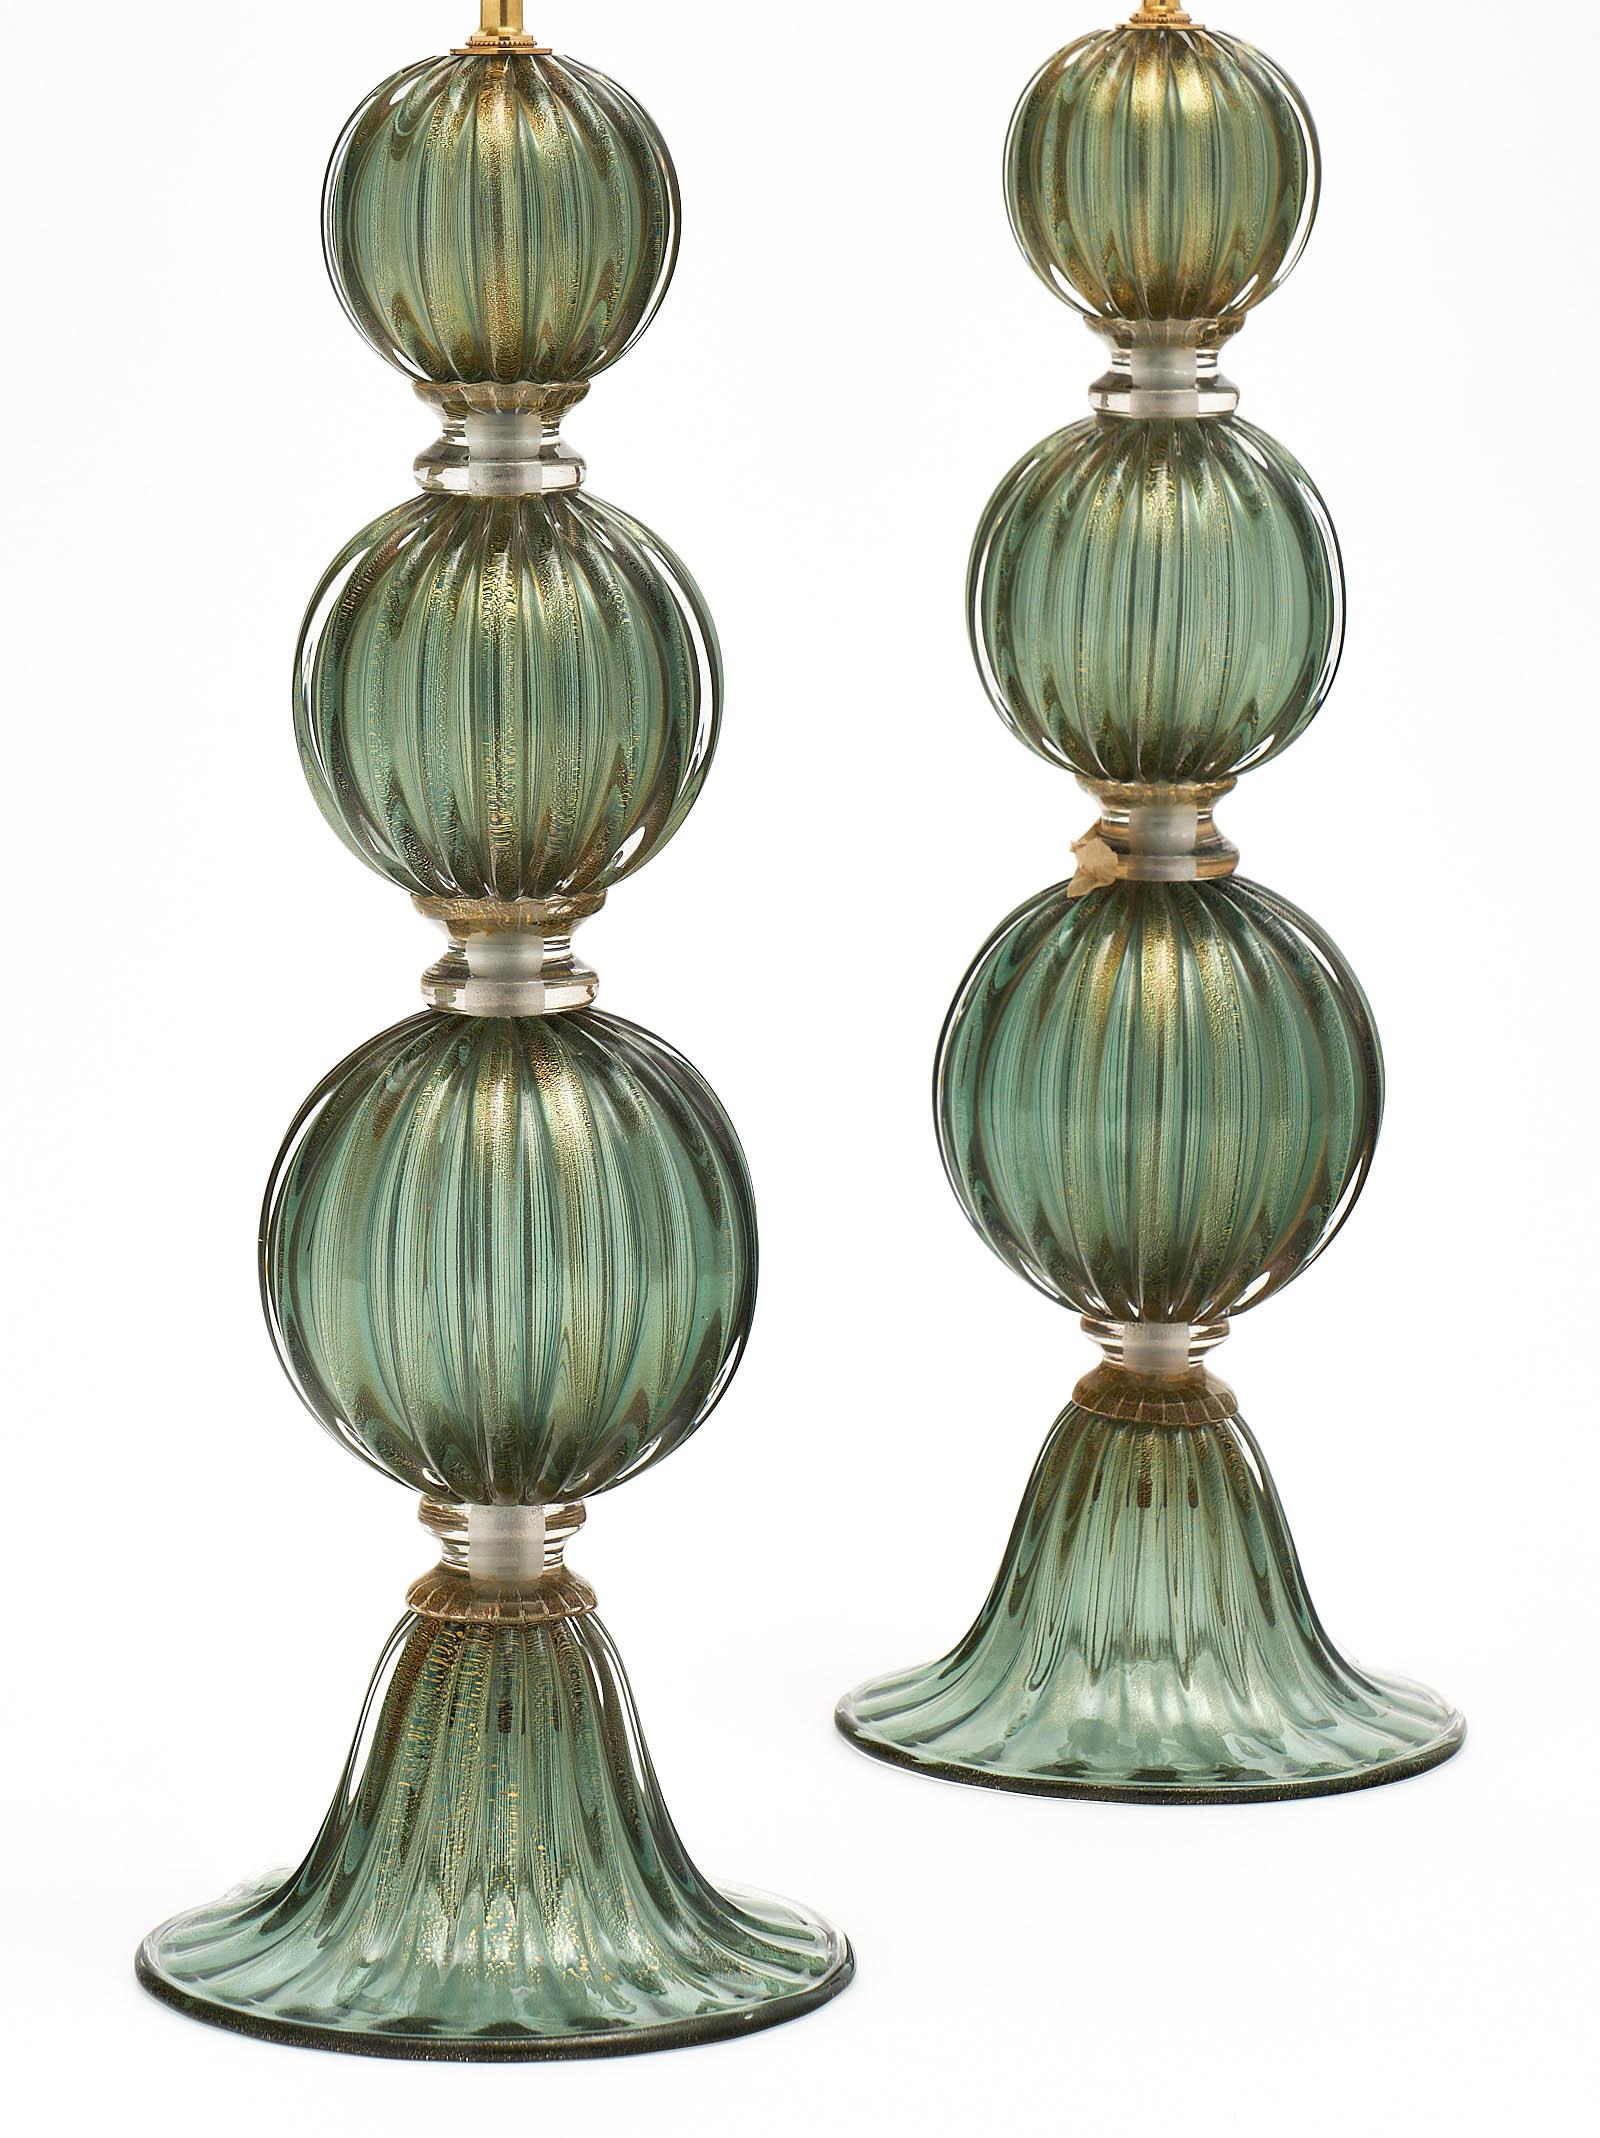 Green avventurina Murano glass lamps with four hand-blown segments of glass and a fluted base. The avventurina process involves fusing 23 carat gold flecks into the glass. This pair has been newly wired for US standards. The height of the glass